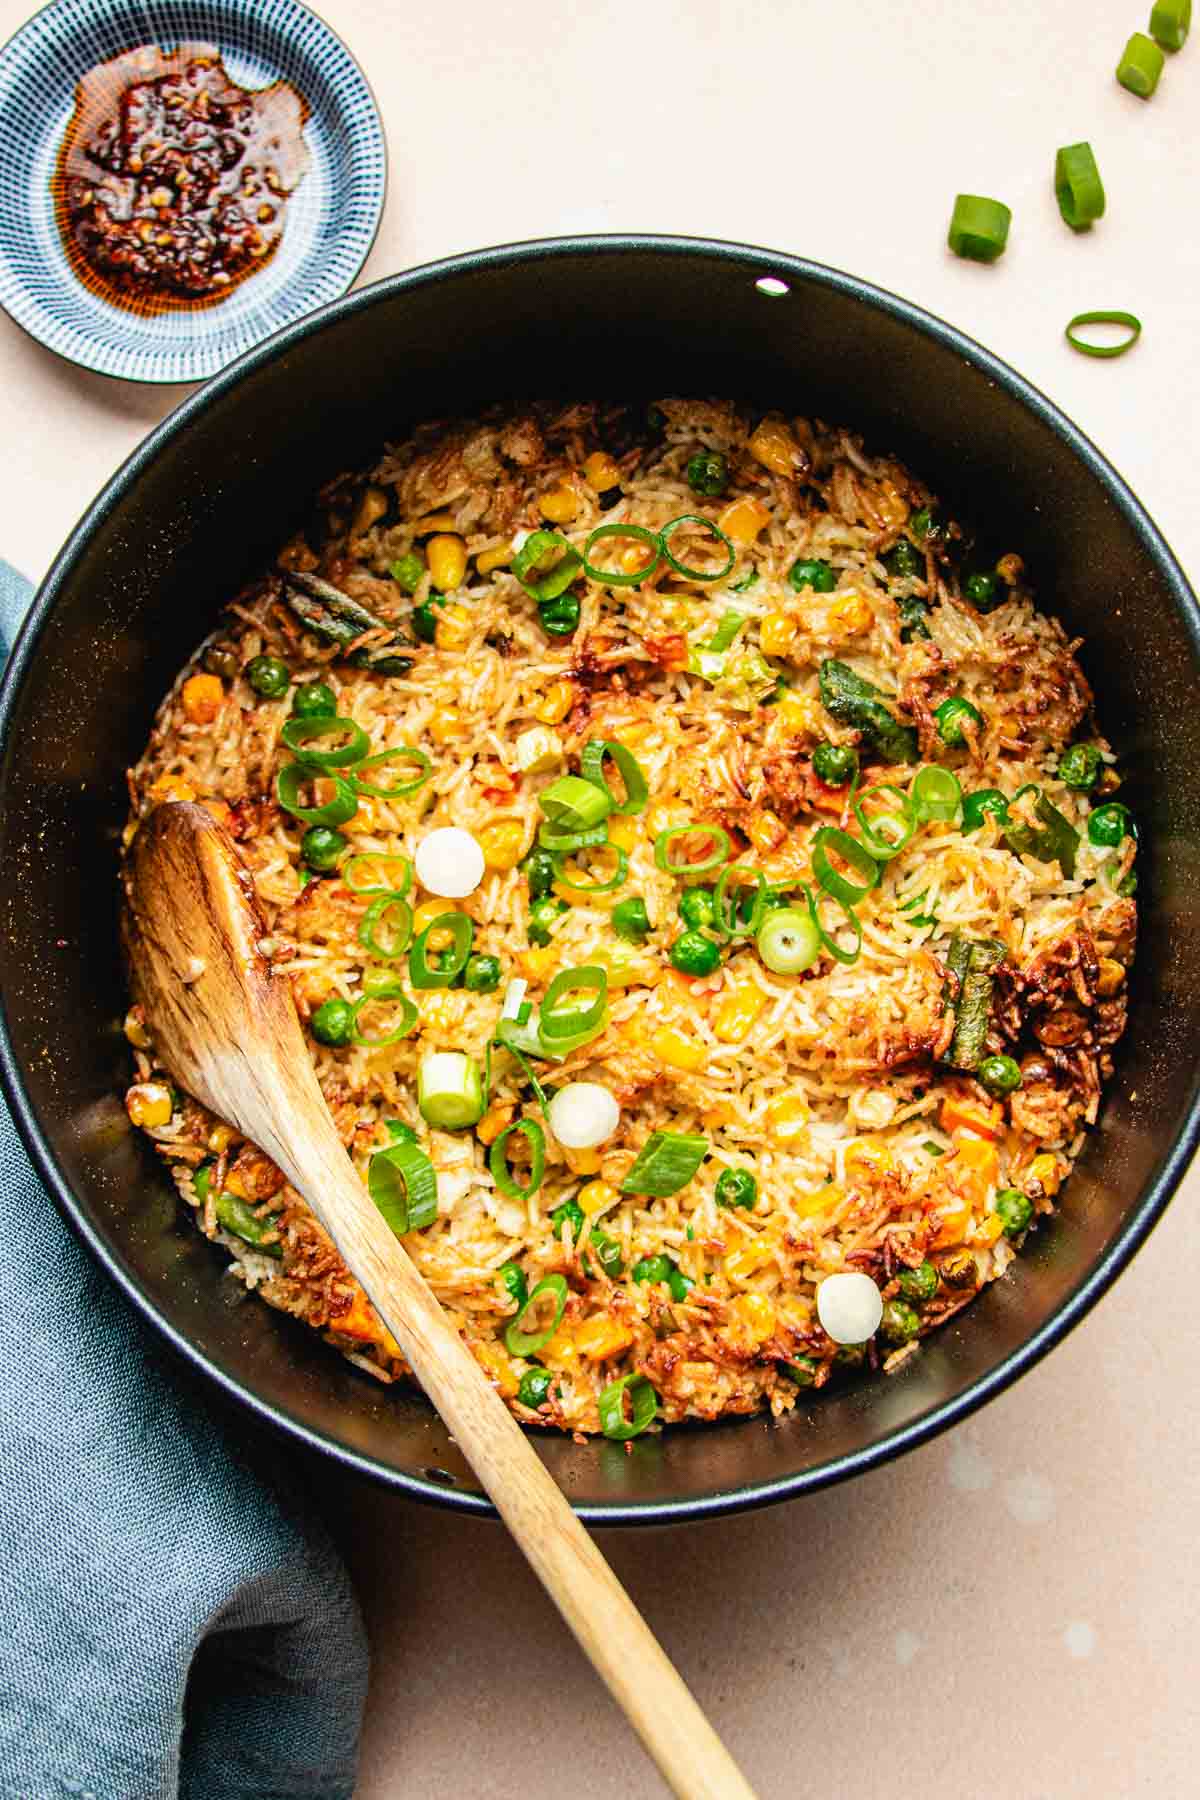 Photo shows air fryer vegetable fried rice made inside of a cake pan